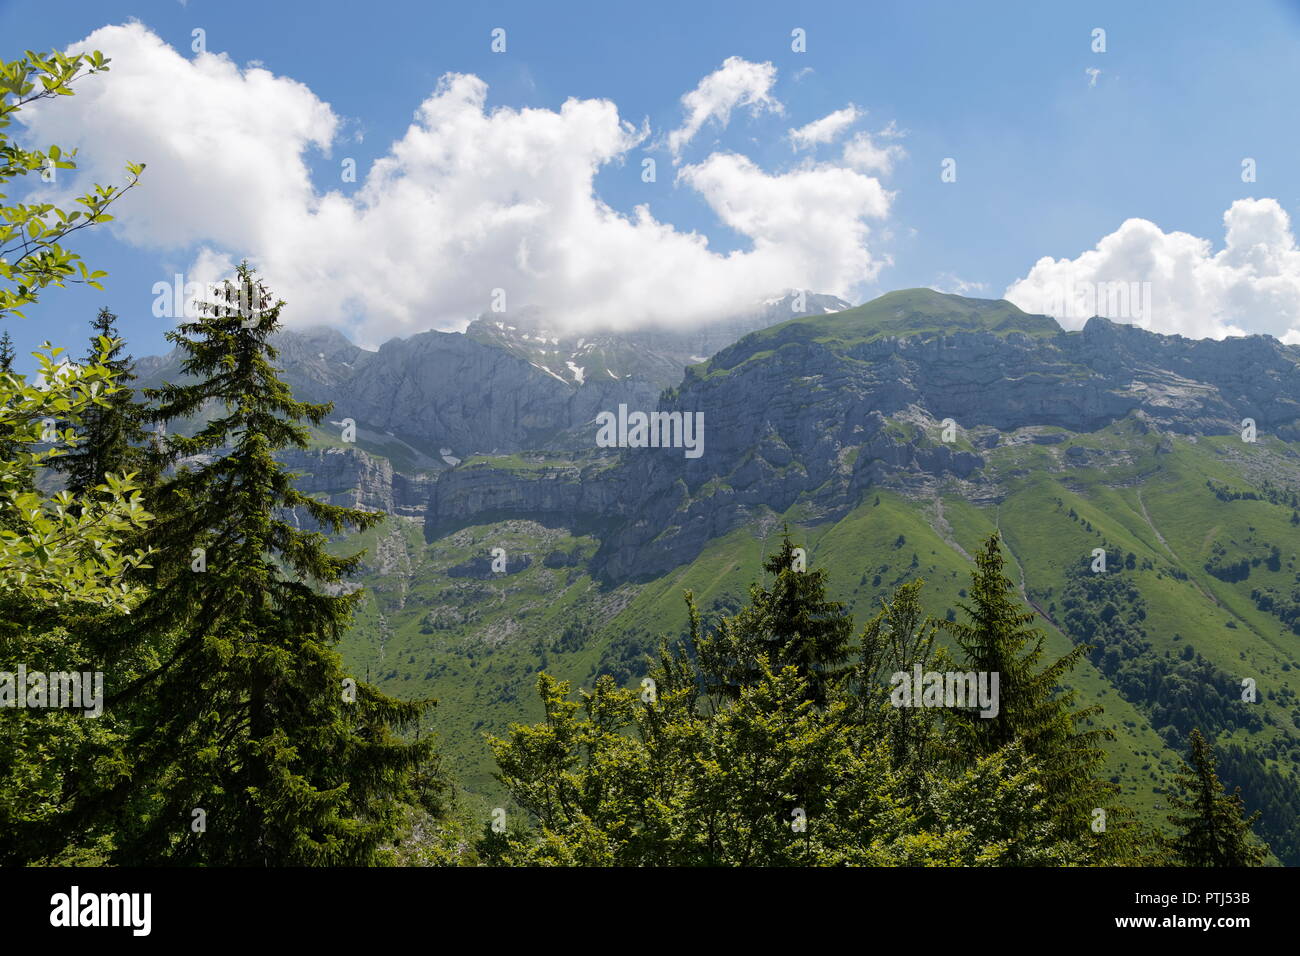 View towards La Tournette from a footpath trail in the forests around Col de la Forclaz France Stock Photo